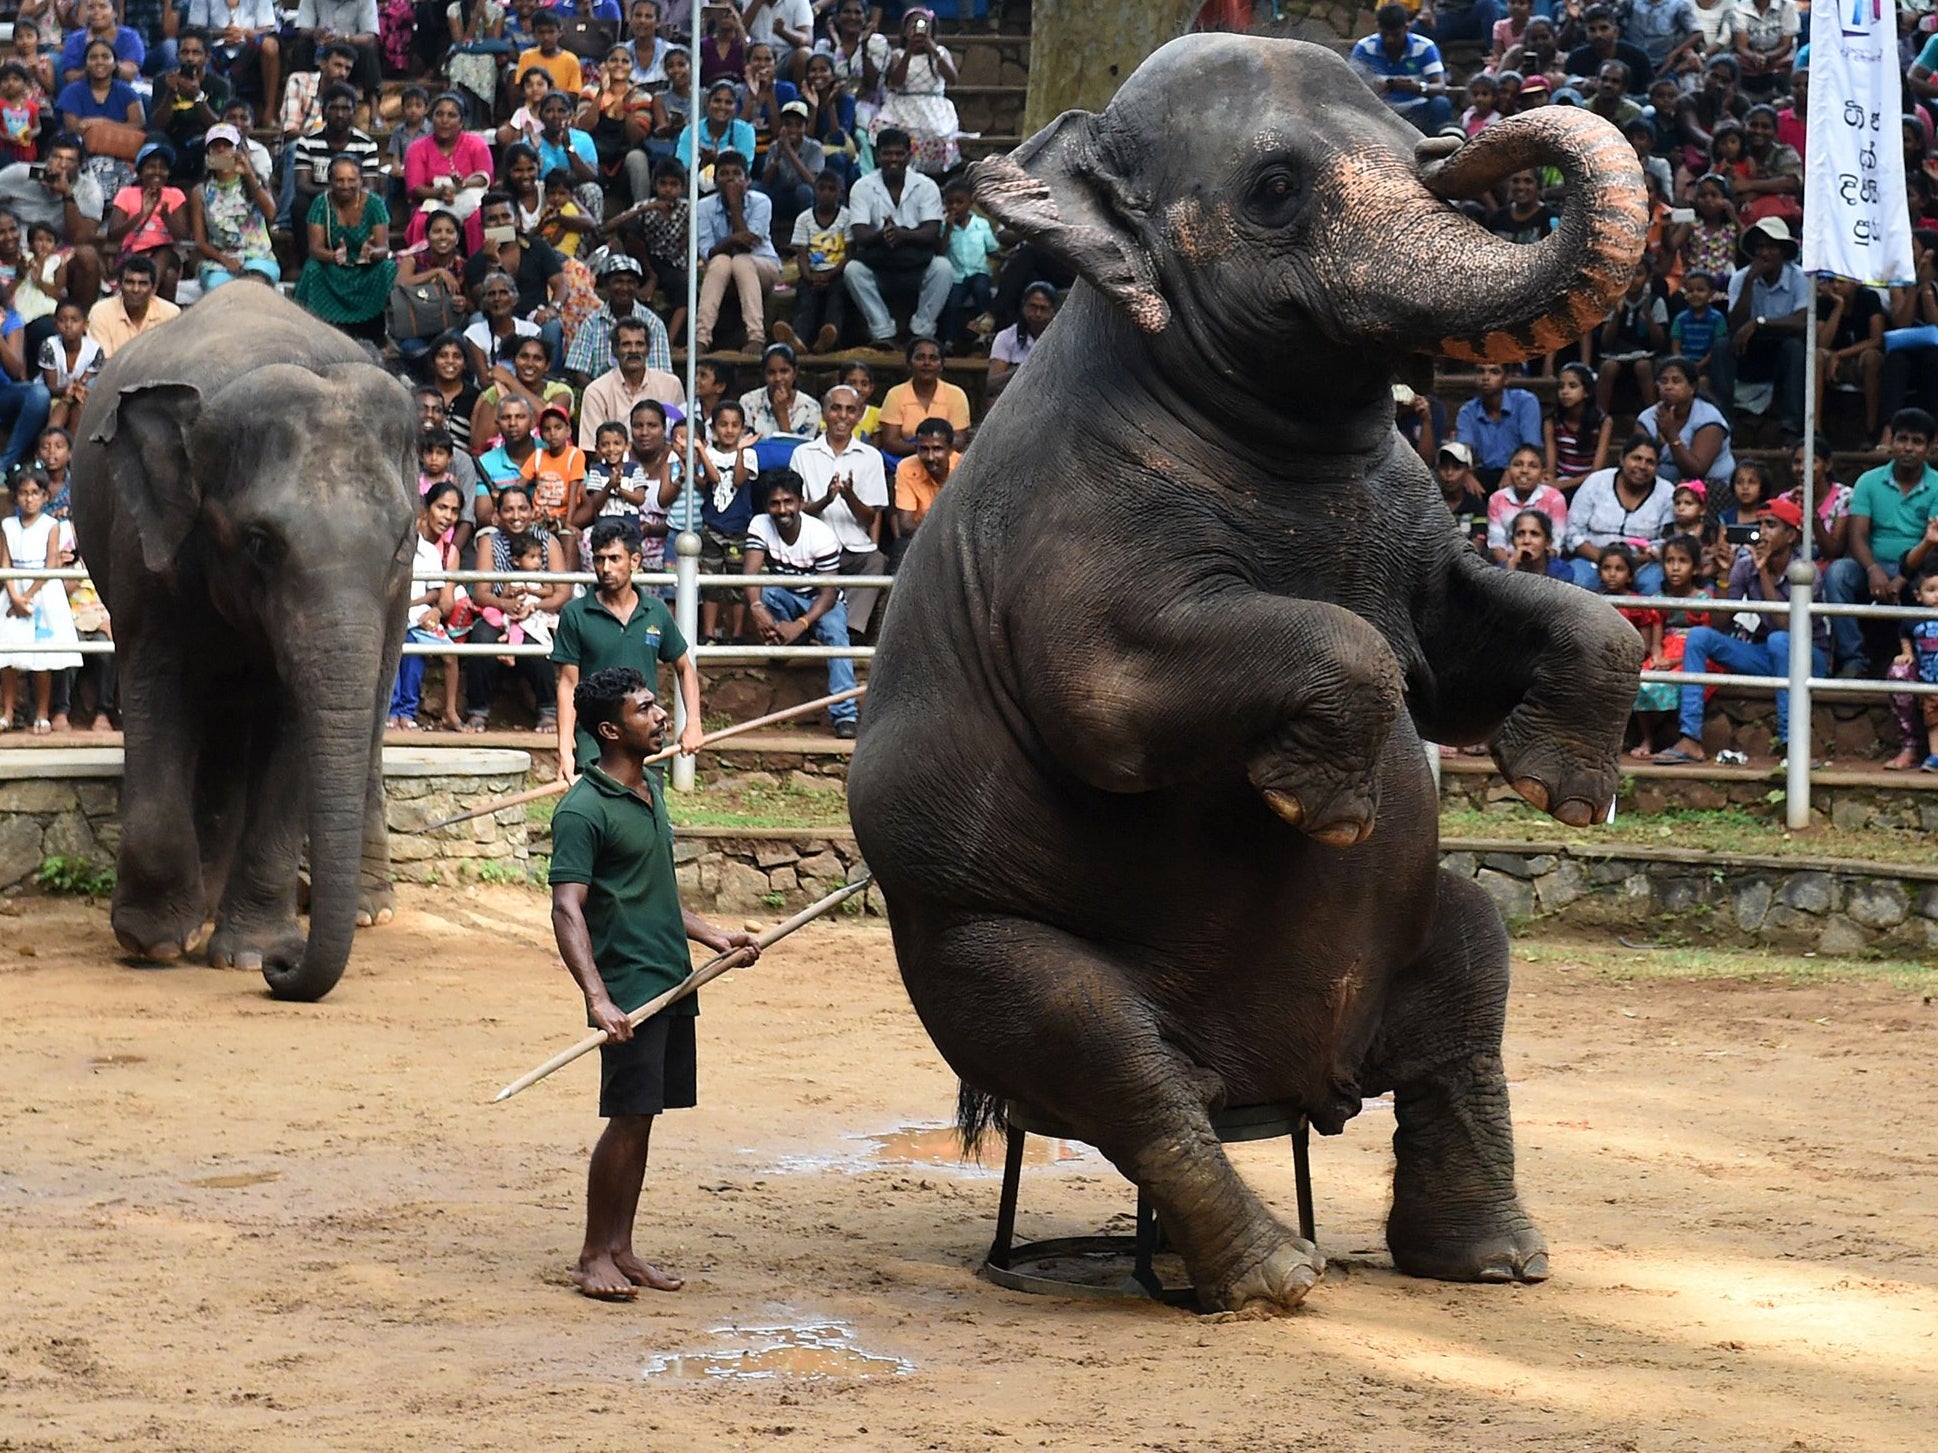 Elephants are forced to obey commands for tourists by being painfully speared, beaten and deprived of food or drink